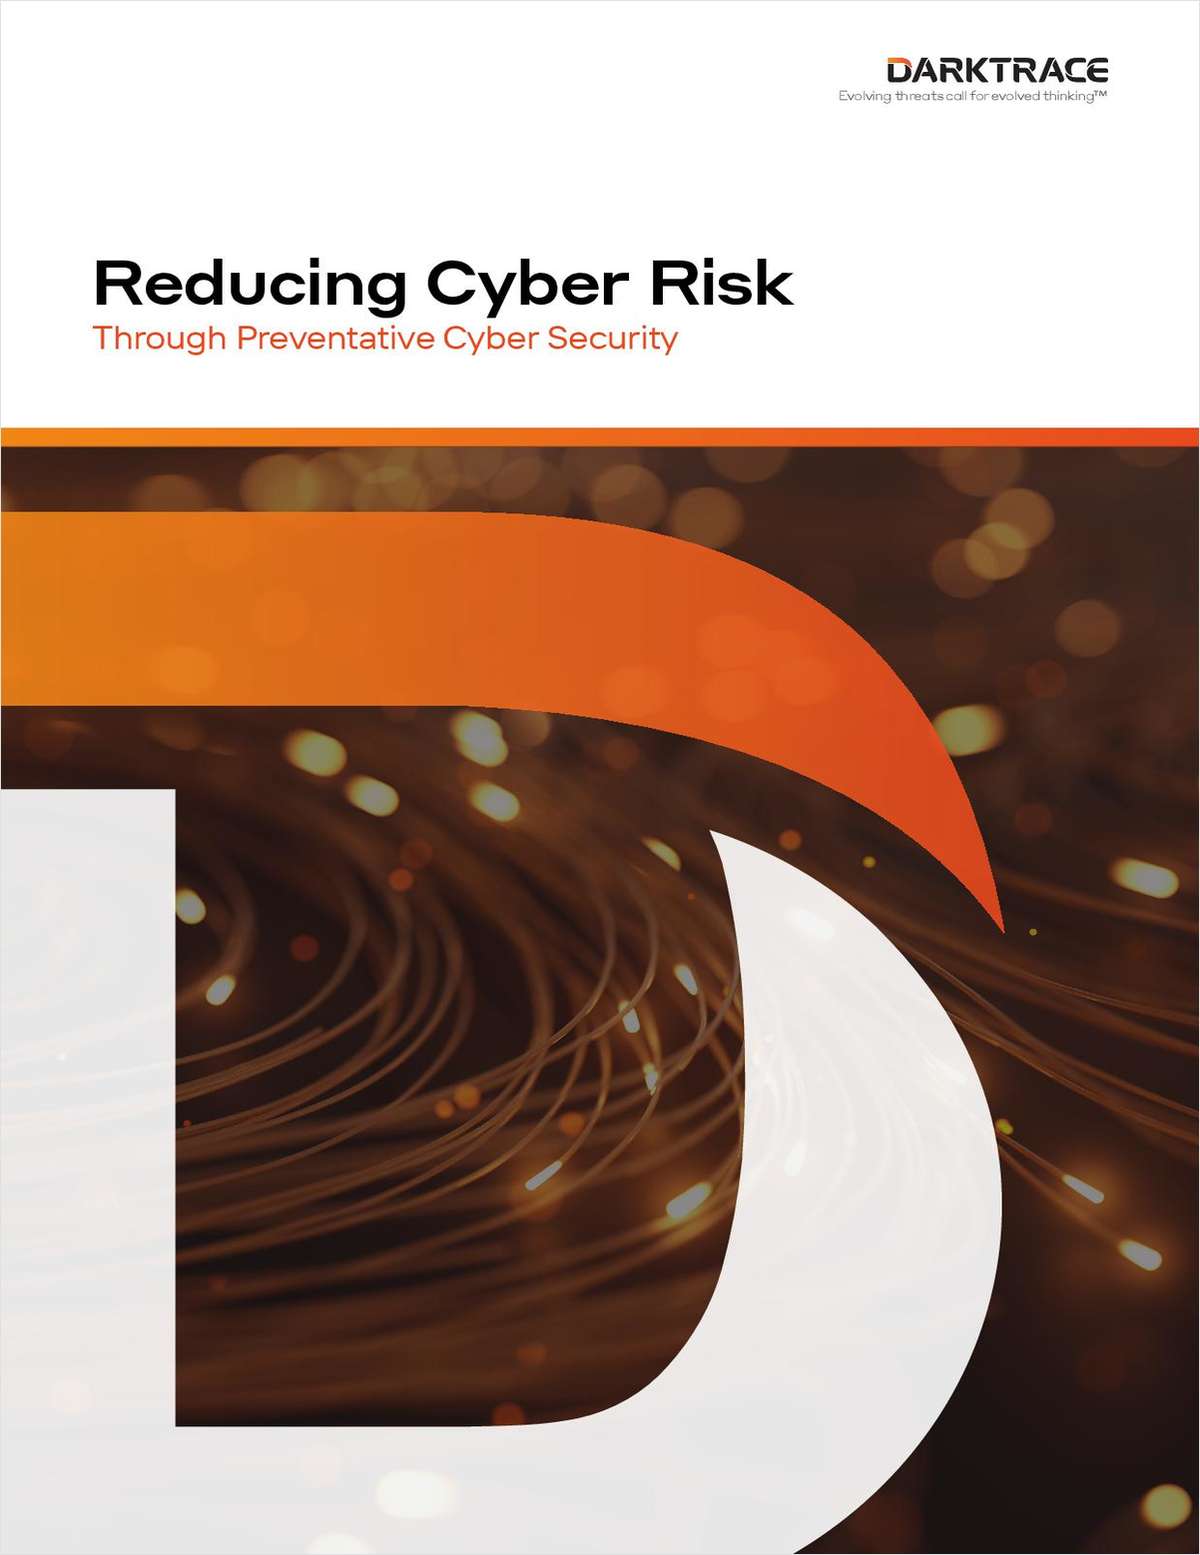 Reducing Cyber Risk with Preventative Cyber Security